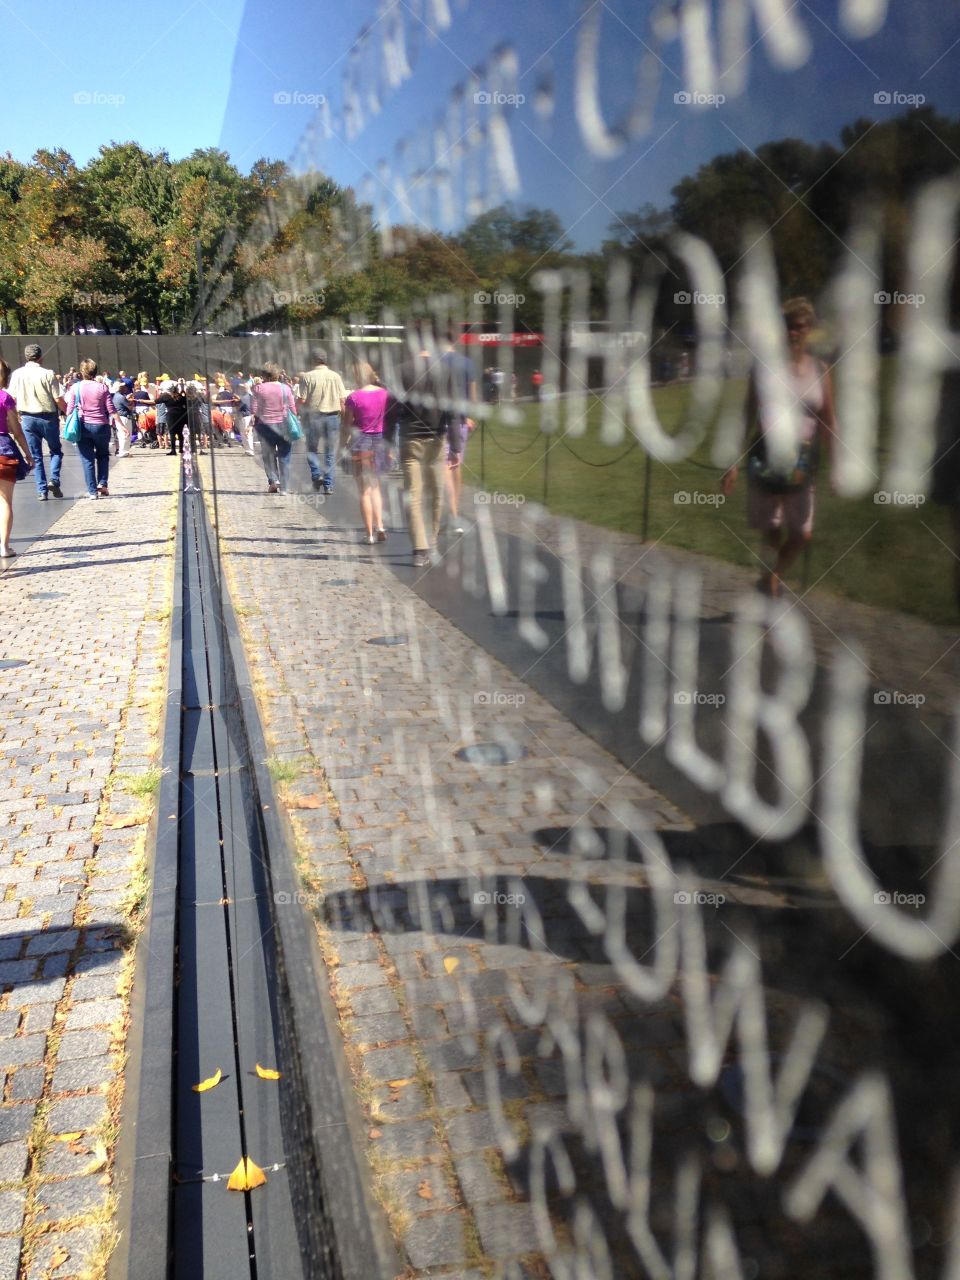 The Wall. The Vietnam Memorial in DC